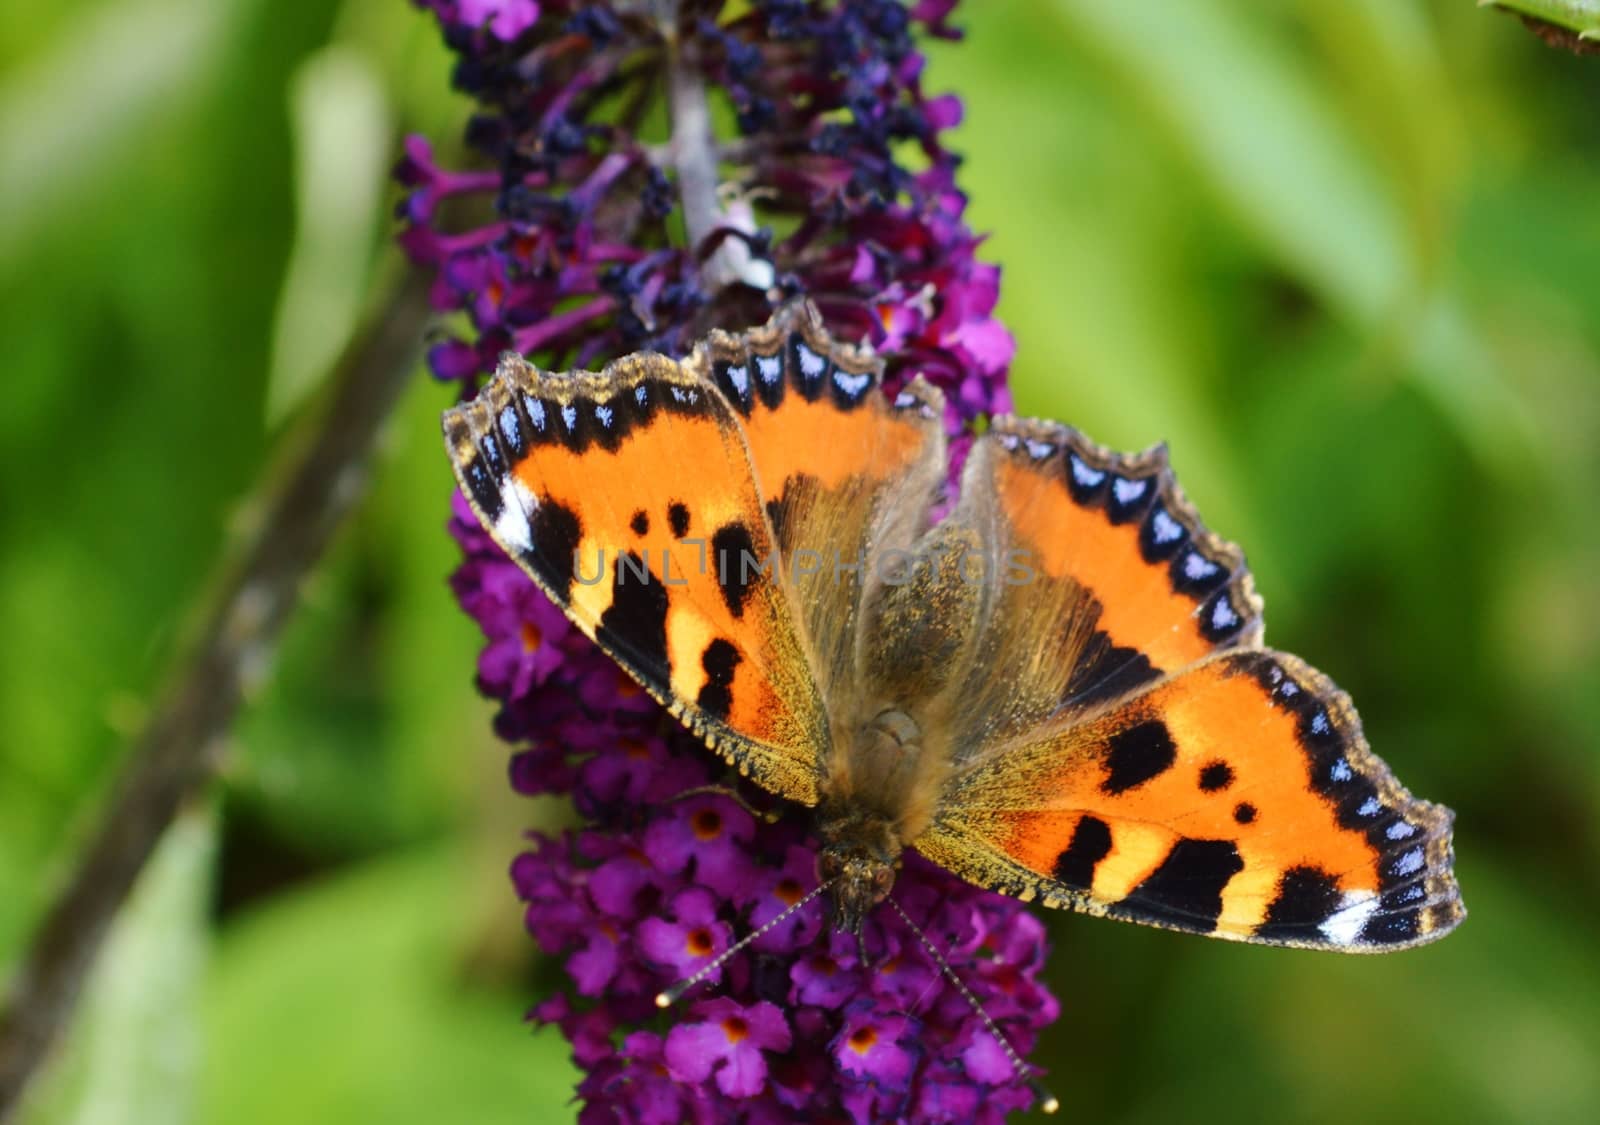 Close-up image of a colourful Small Tortoiseshell Butterfly.